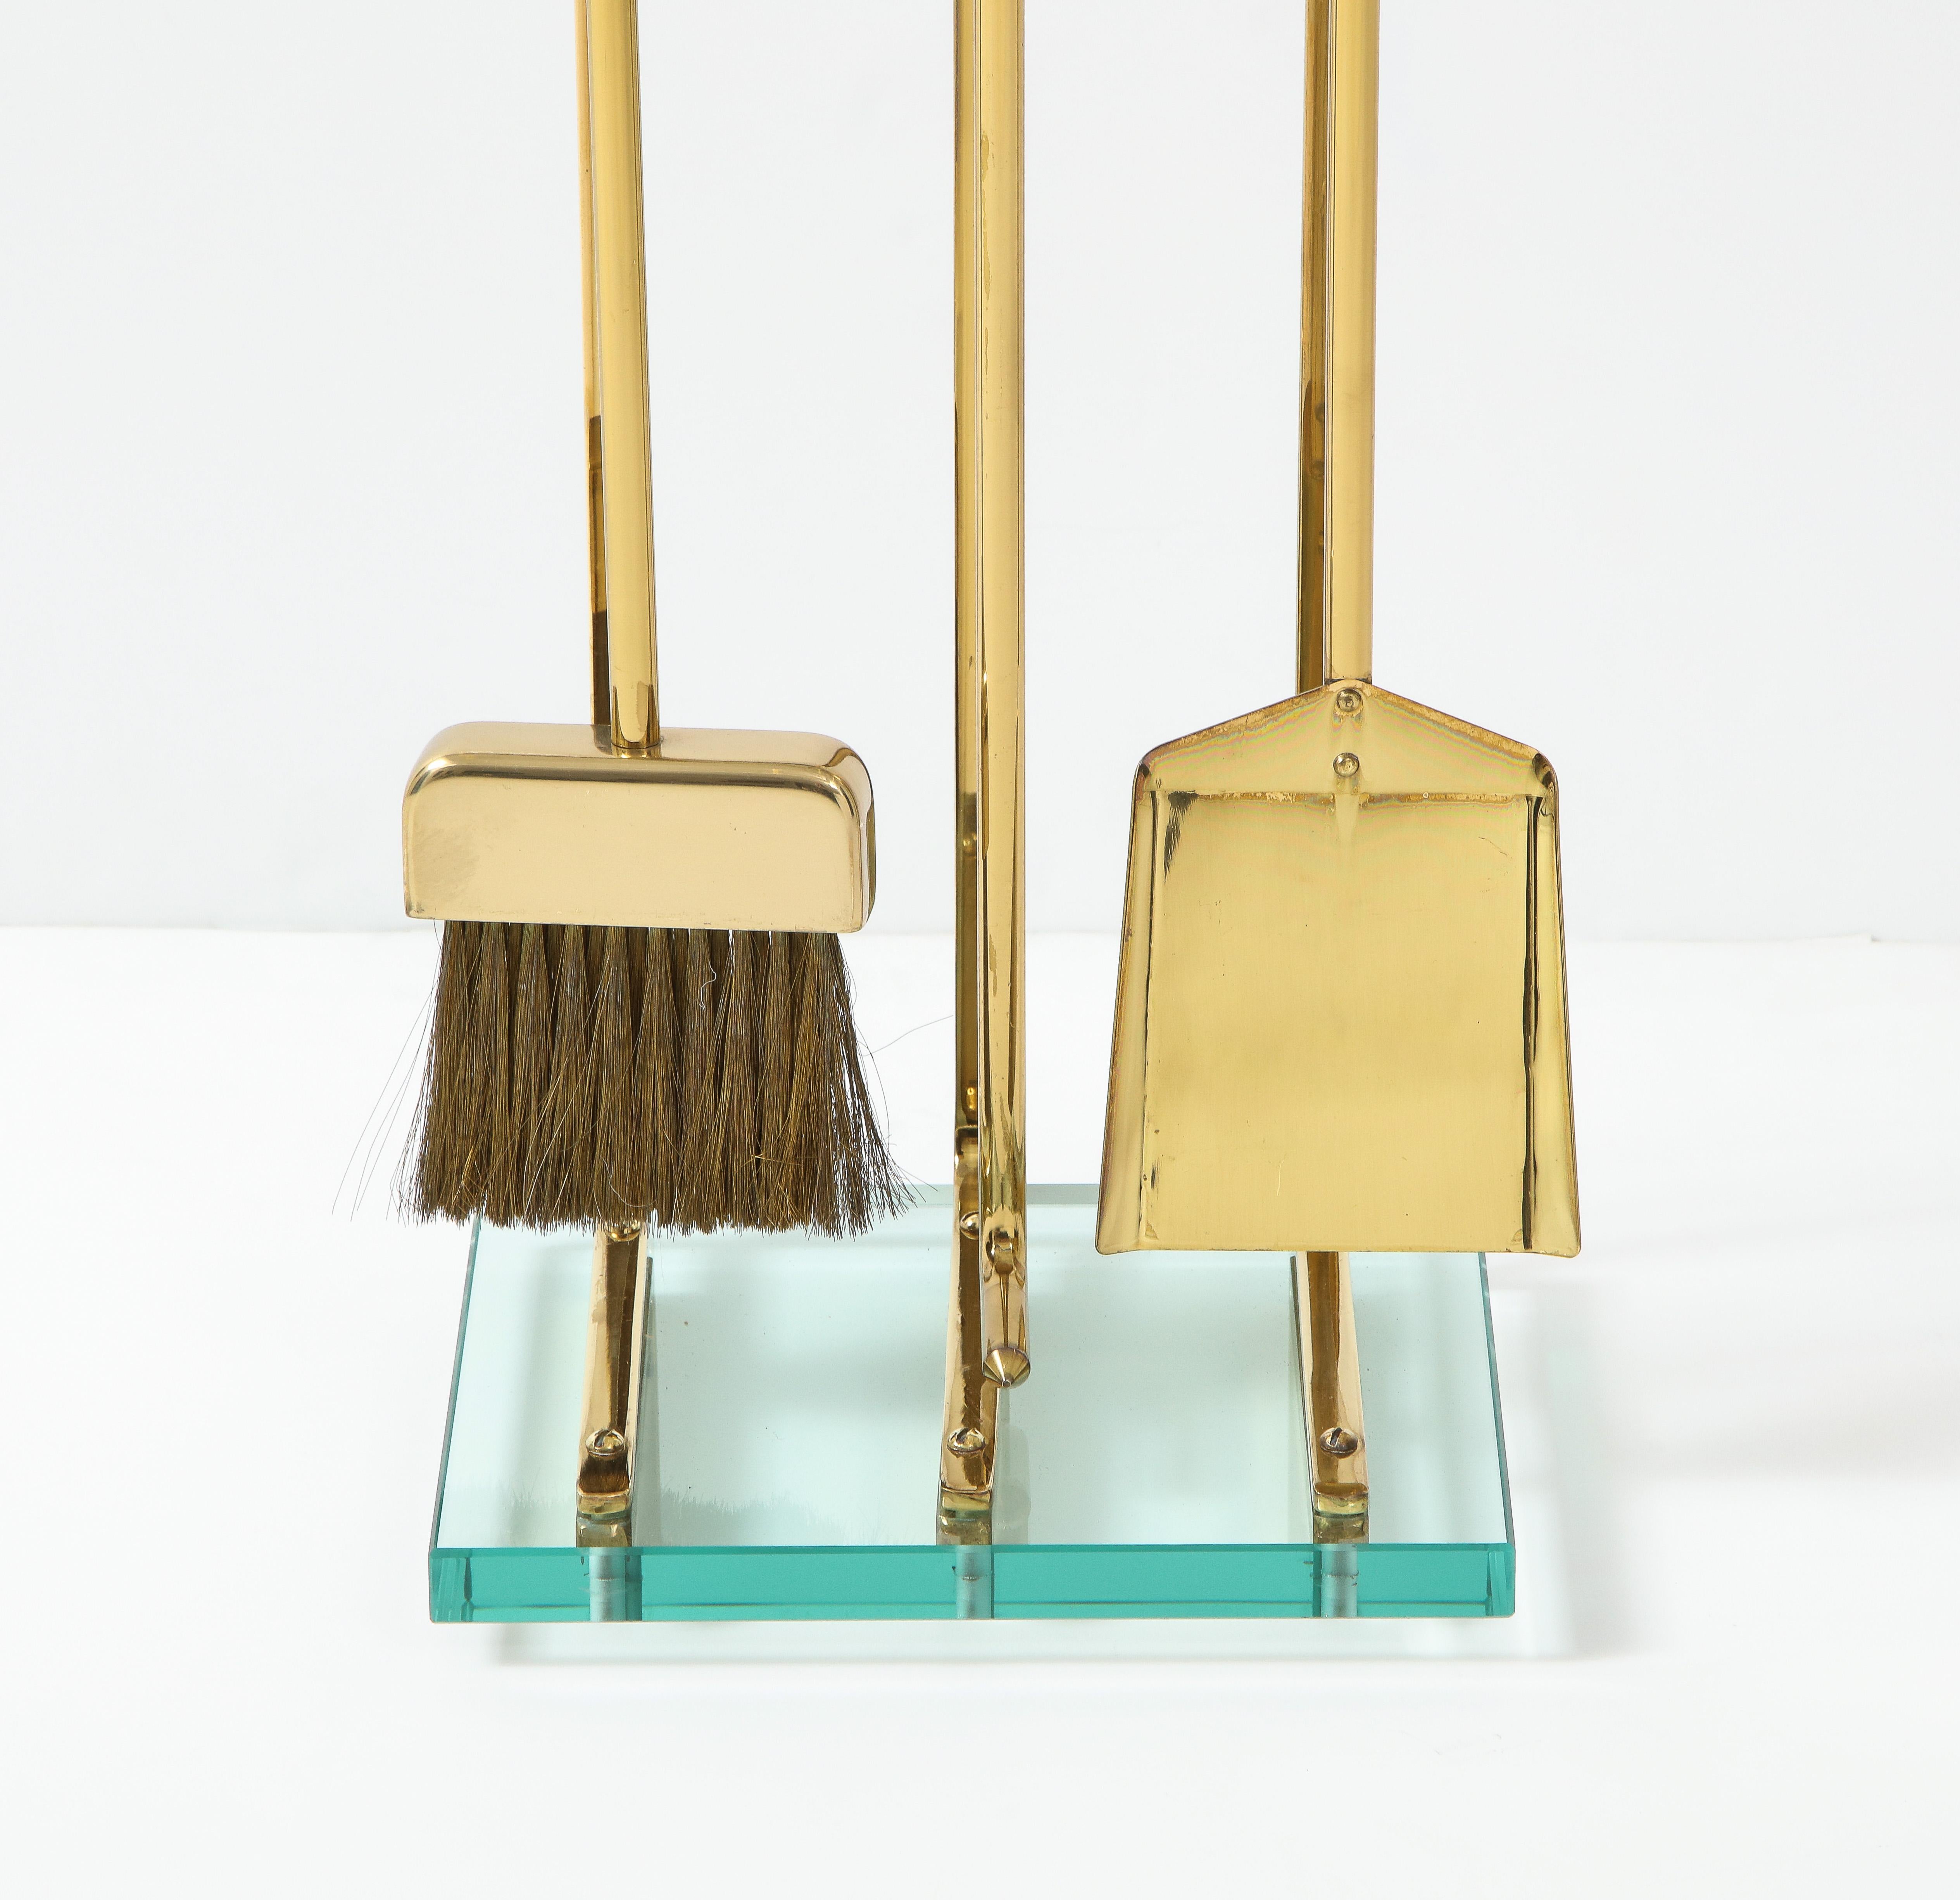 Stunning set of 1970's Mid-Century Modern brass and glass fireplace tools in the style of Fontana Arte, in vintage original condition with minor wear and patina due to age and use.